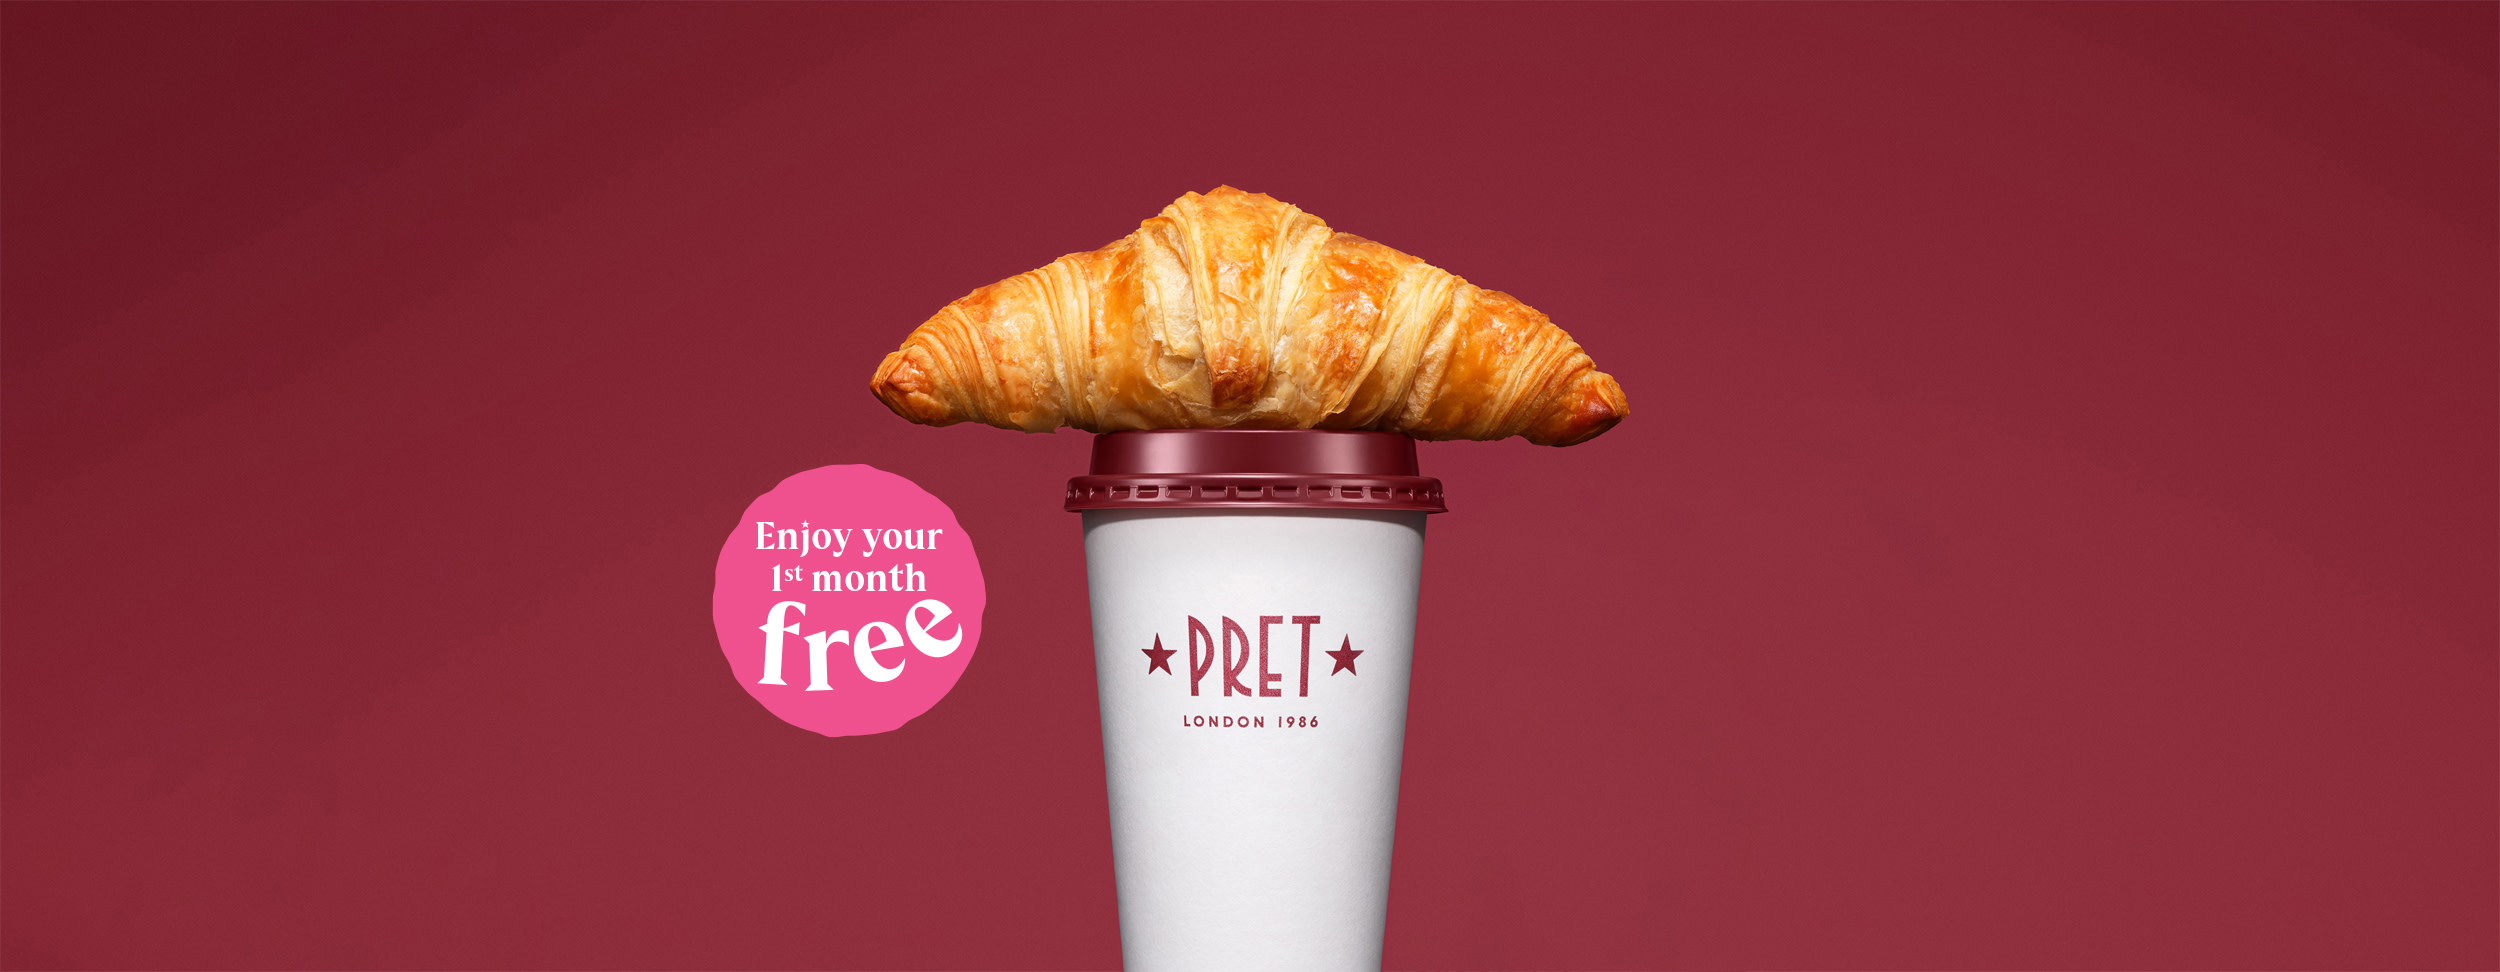 Free One Month Pret Drinks